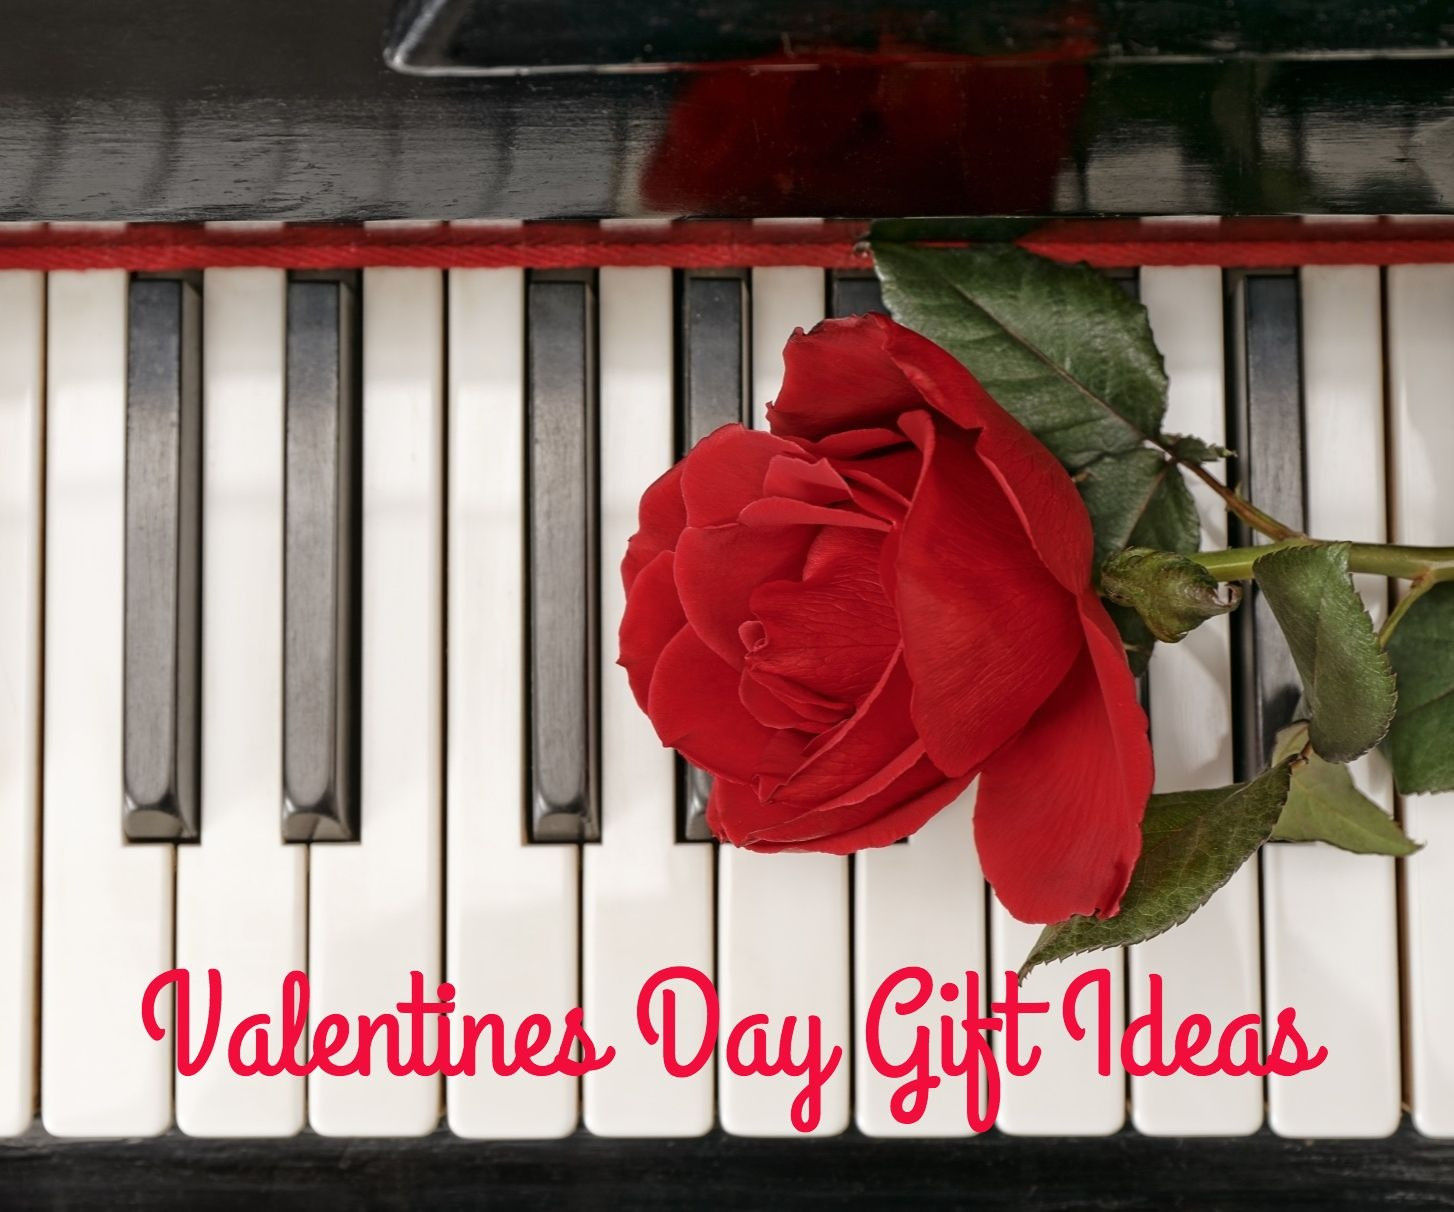 Best ideas about Valentines Day Creative Gift Ideas
. Save or Pin 5 Valentines Day Gift Ideas Muscogee Moms Now.